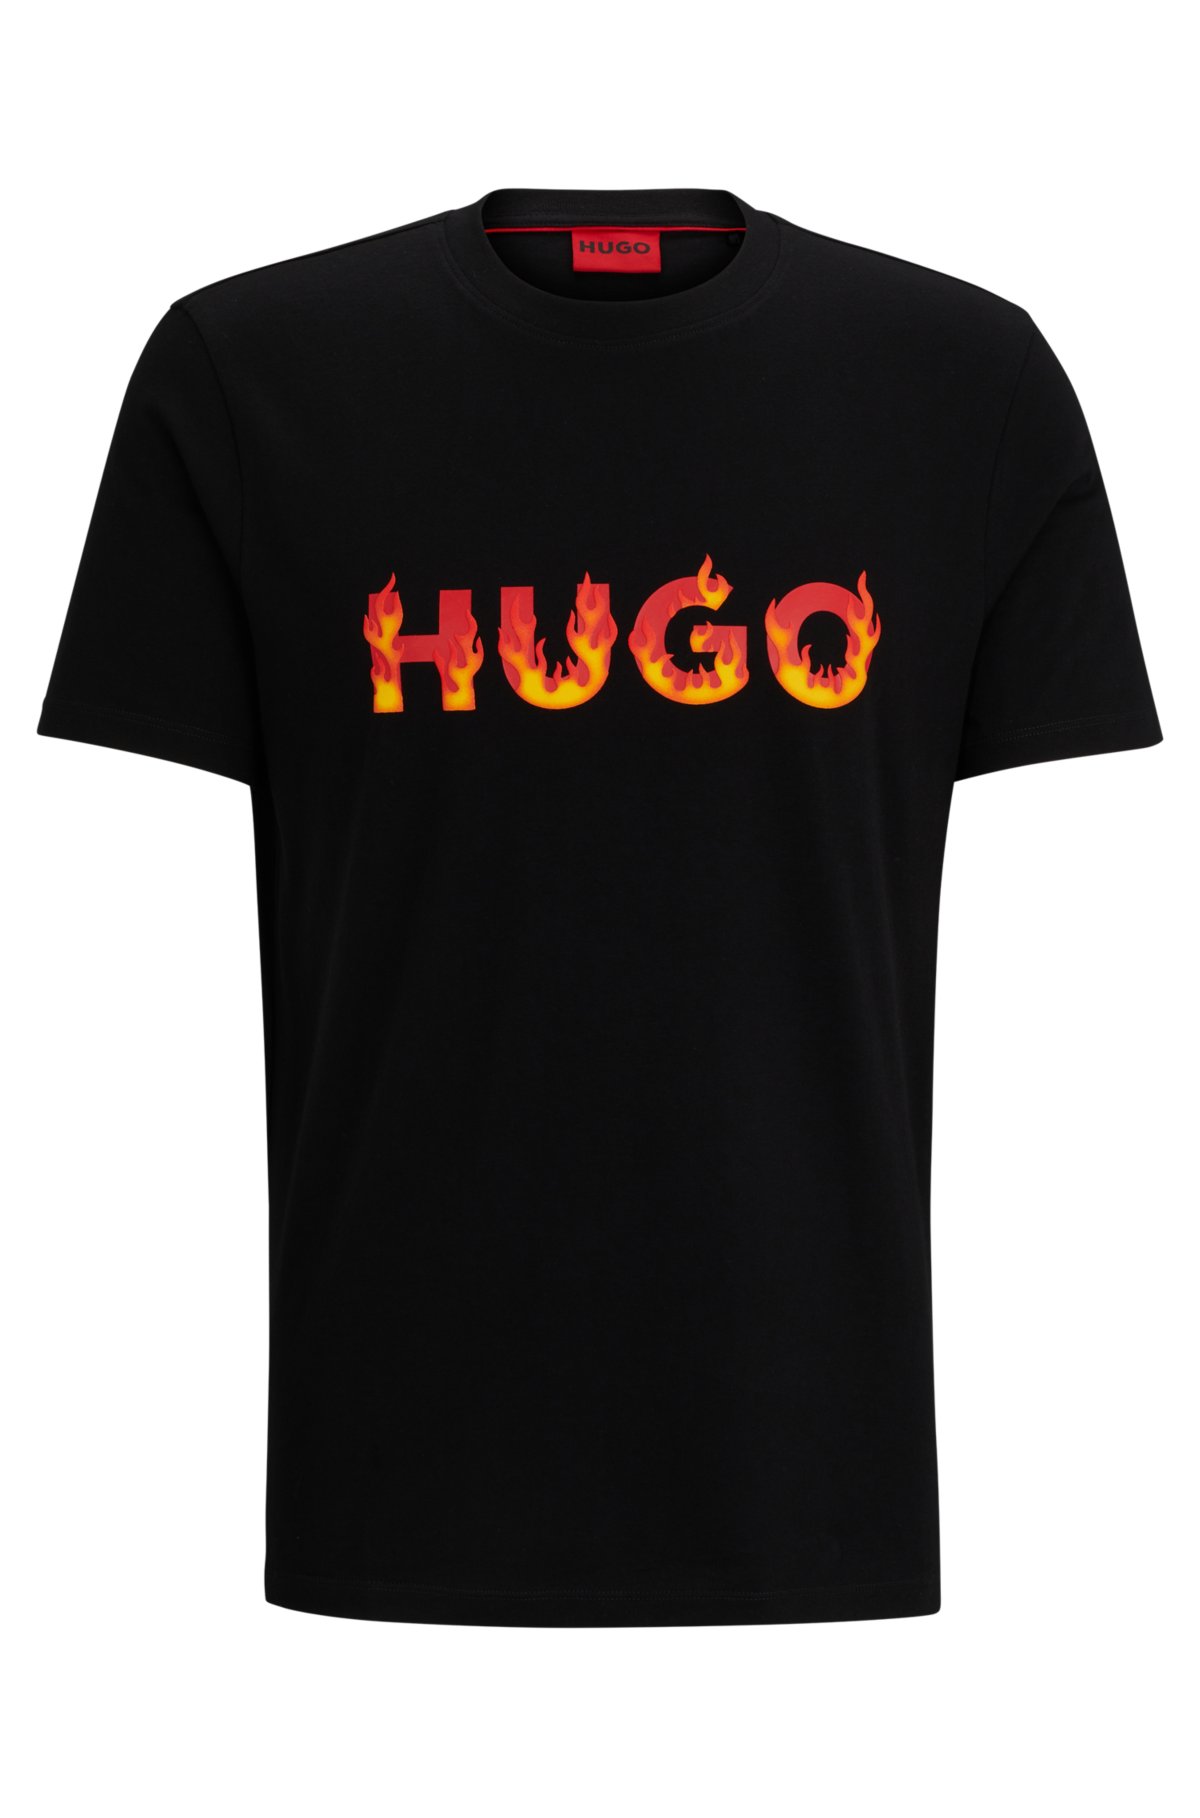 Cotton-jersey T-shirt with puffed flame logo, Black